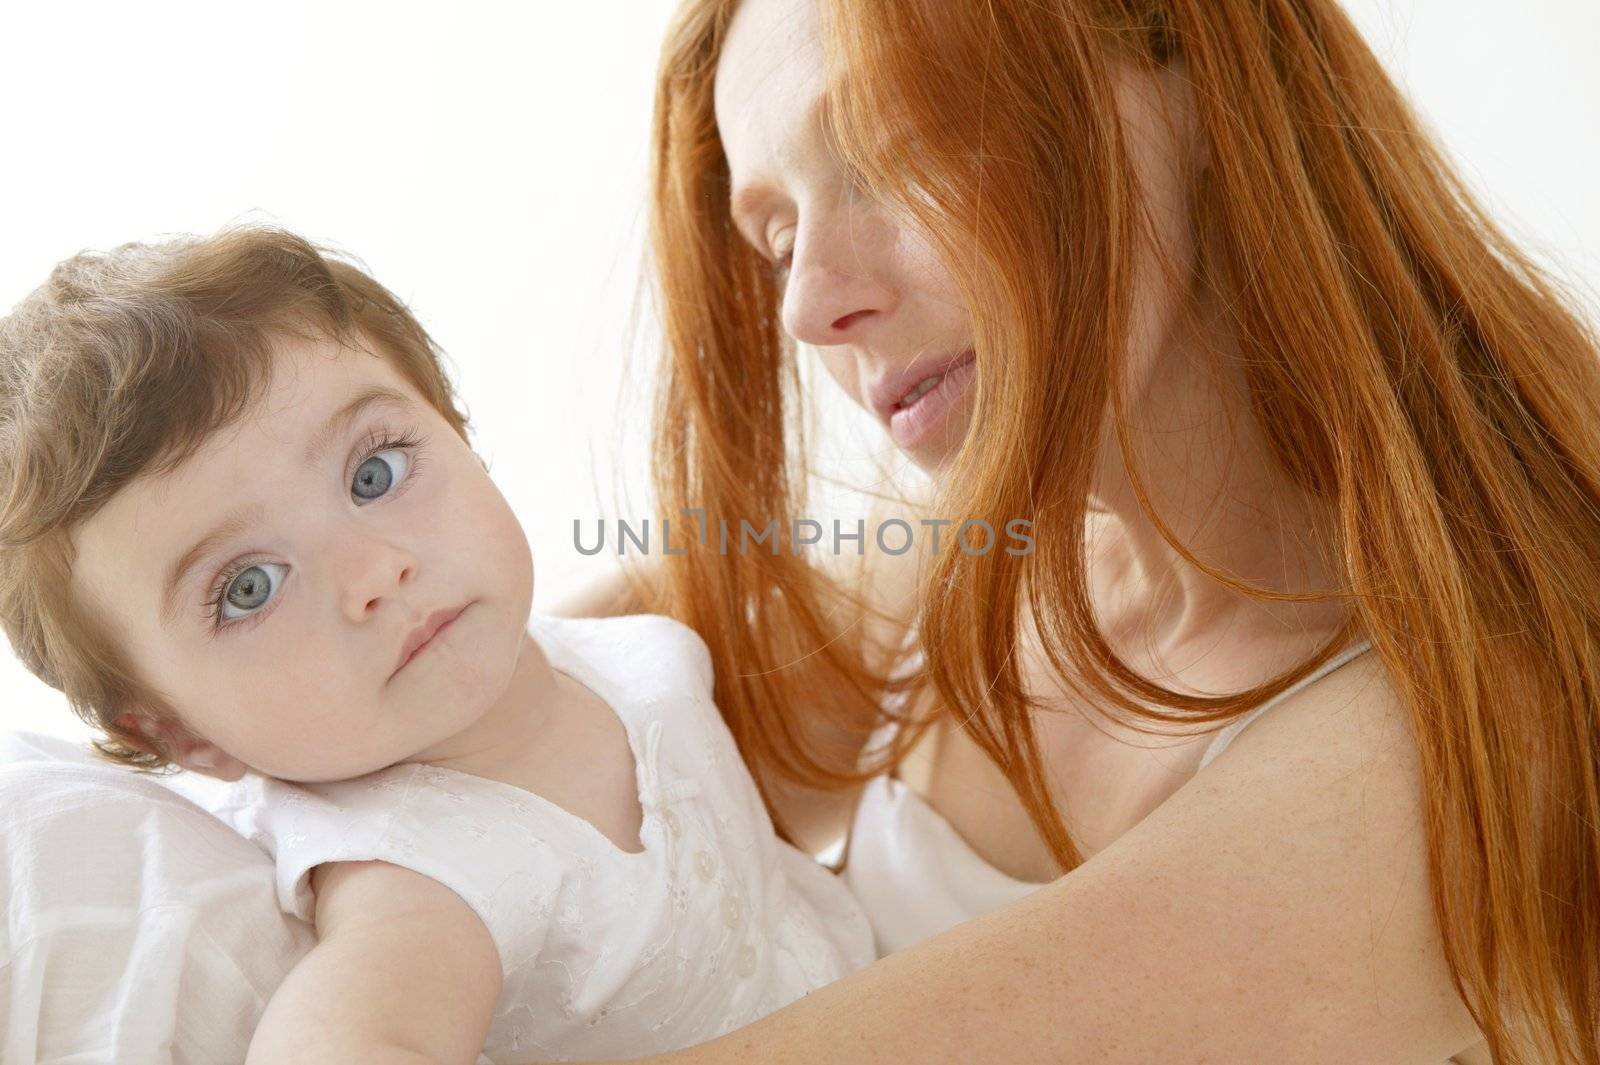 baby and mom in love hug over white studio background